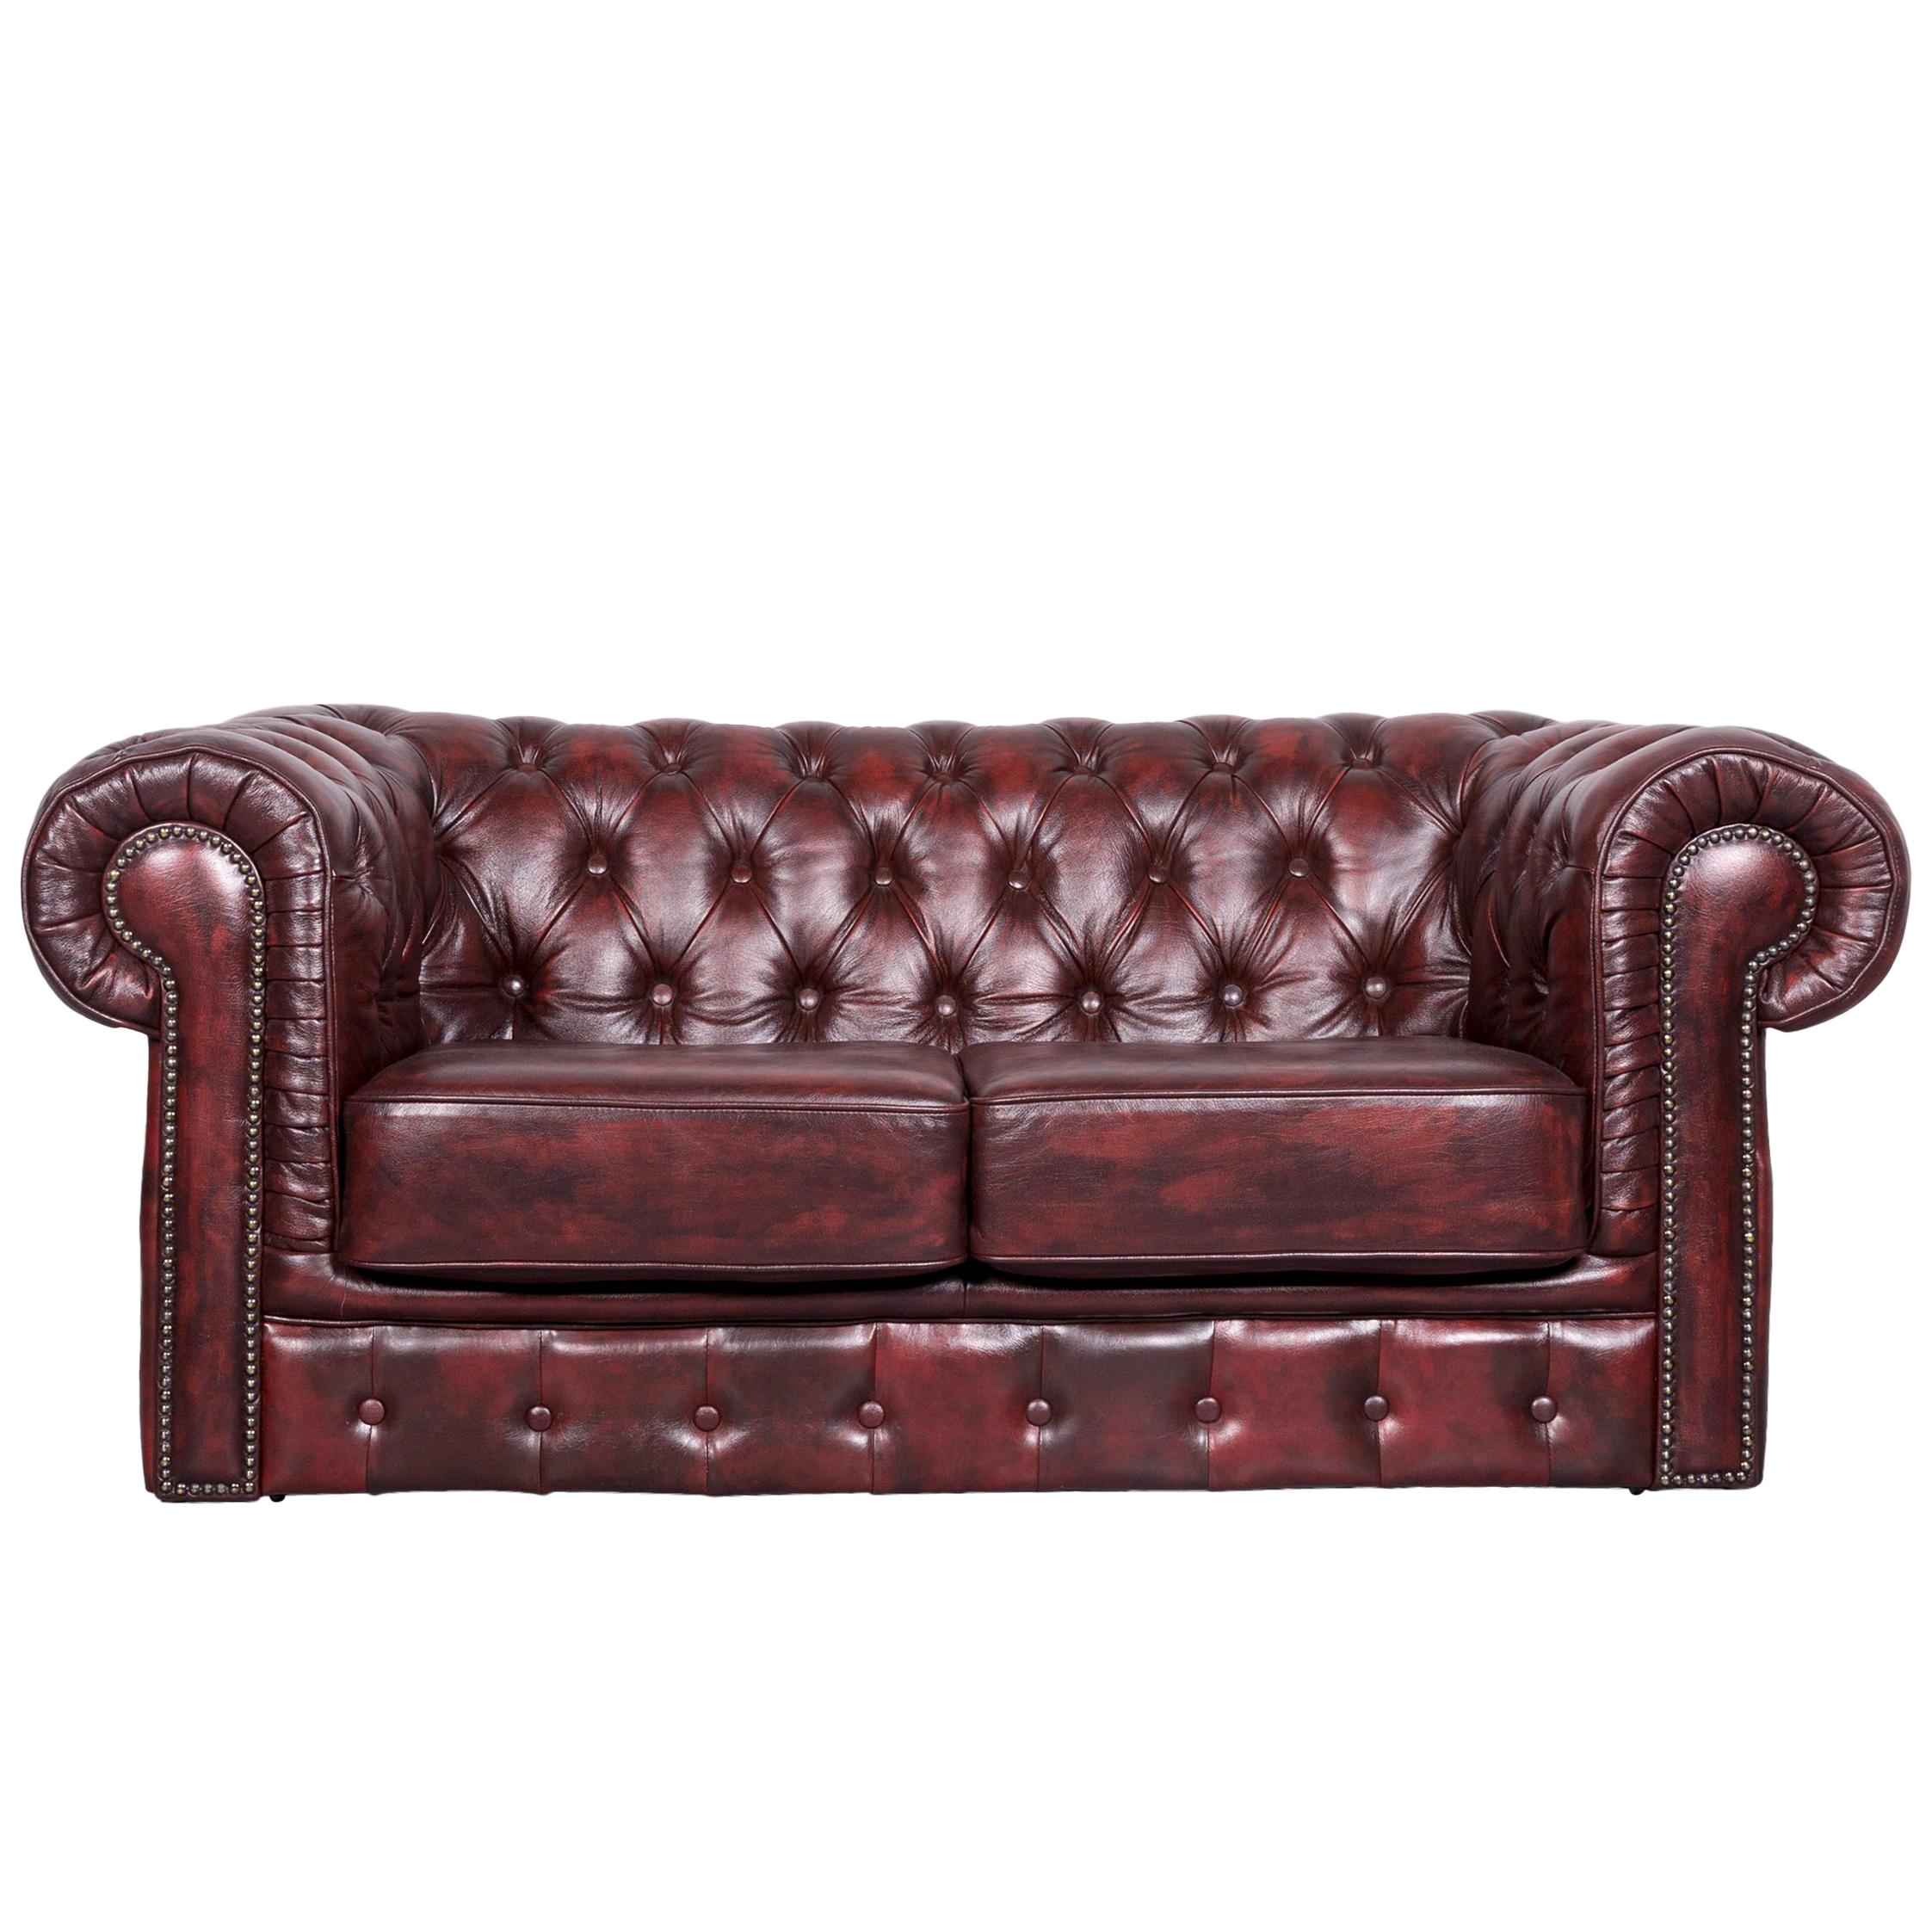 Chesterfield Style Vintage Leather Sofa Two-Seat Couch Red